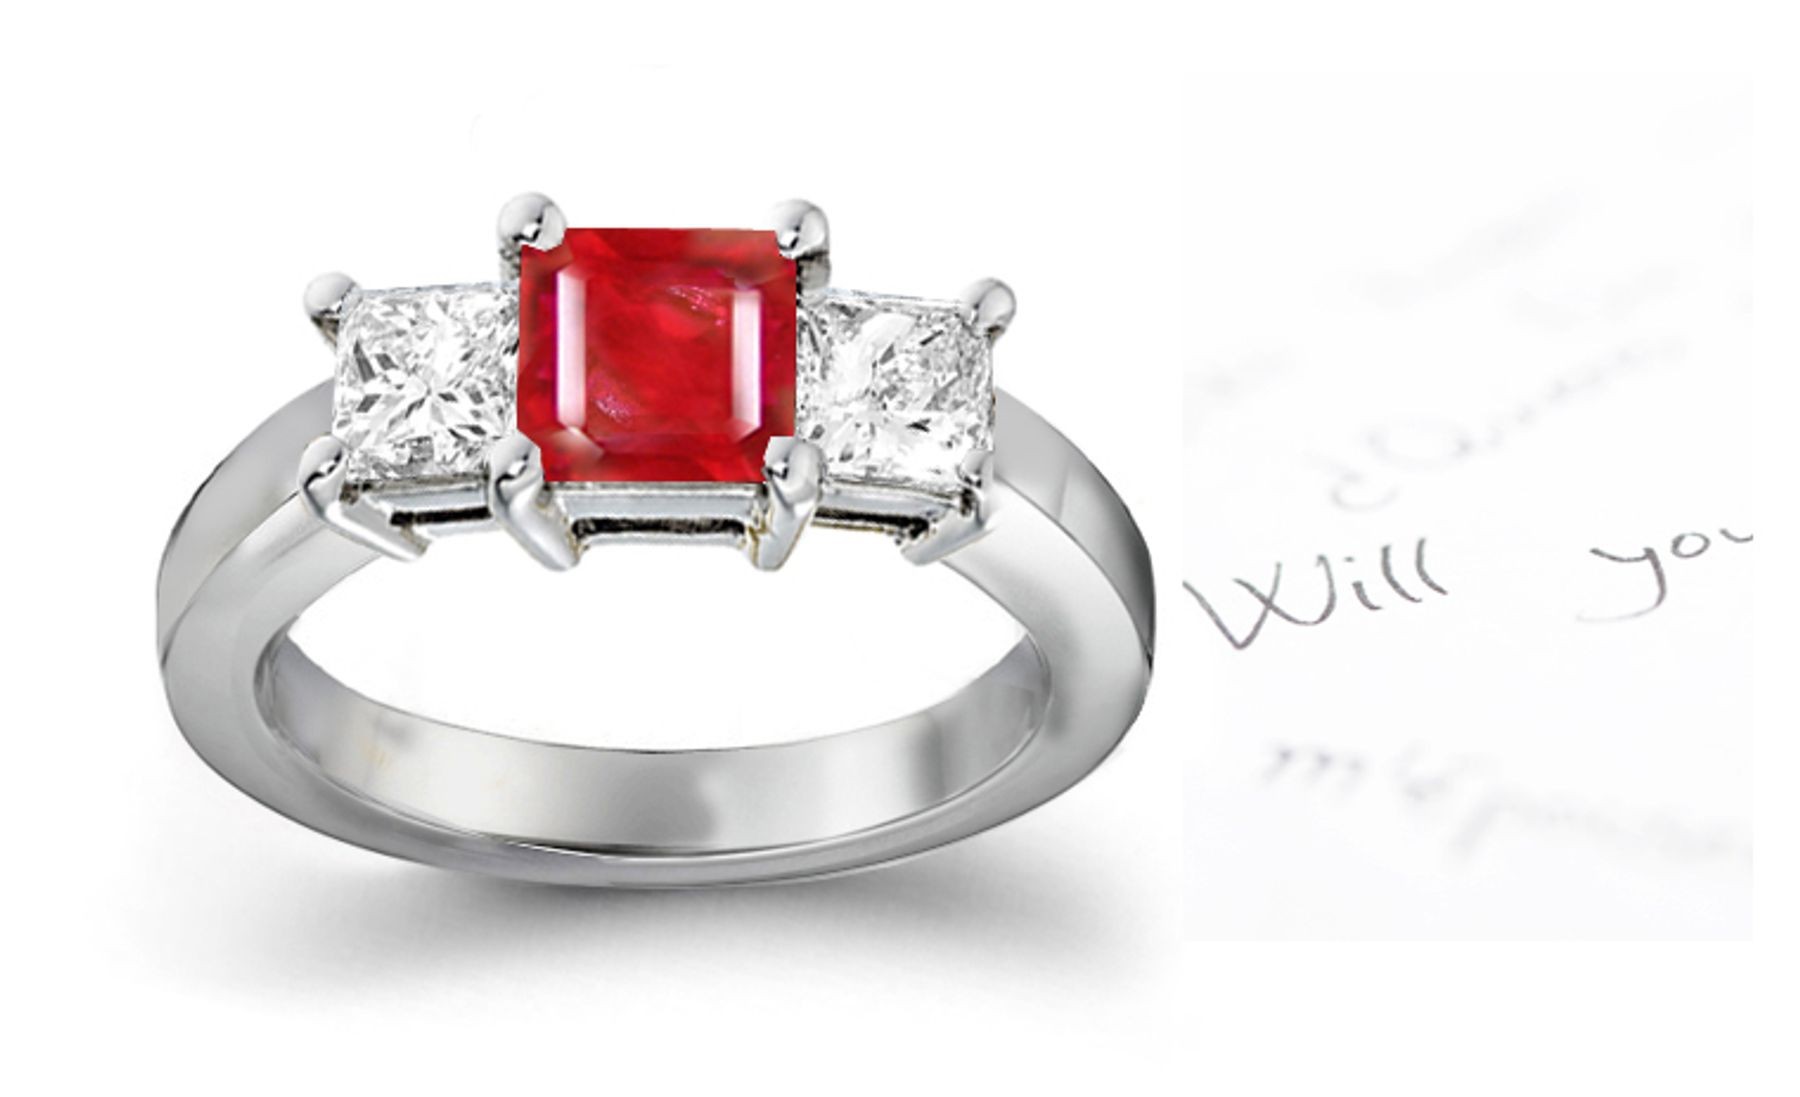 Design Your Own Ring: The finest ruby is a vivid, almost pure soectral red. Diamond and Ruby 14K White Gold Ring